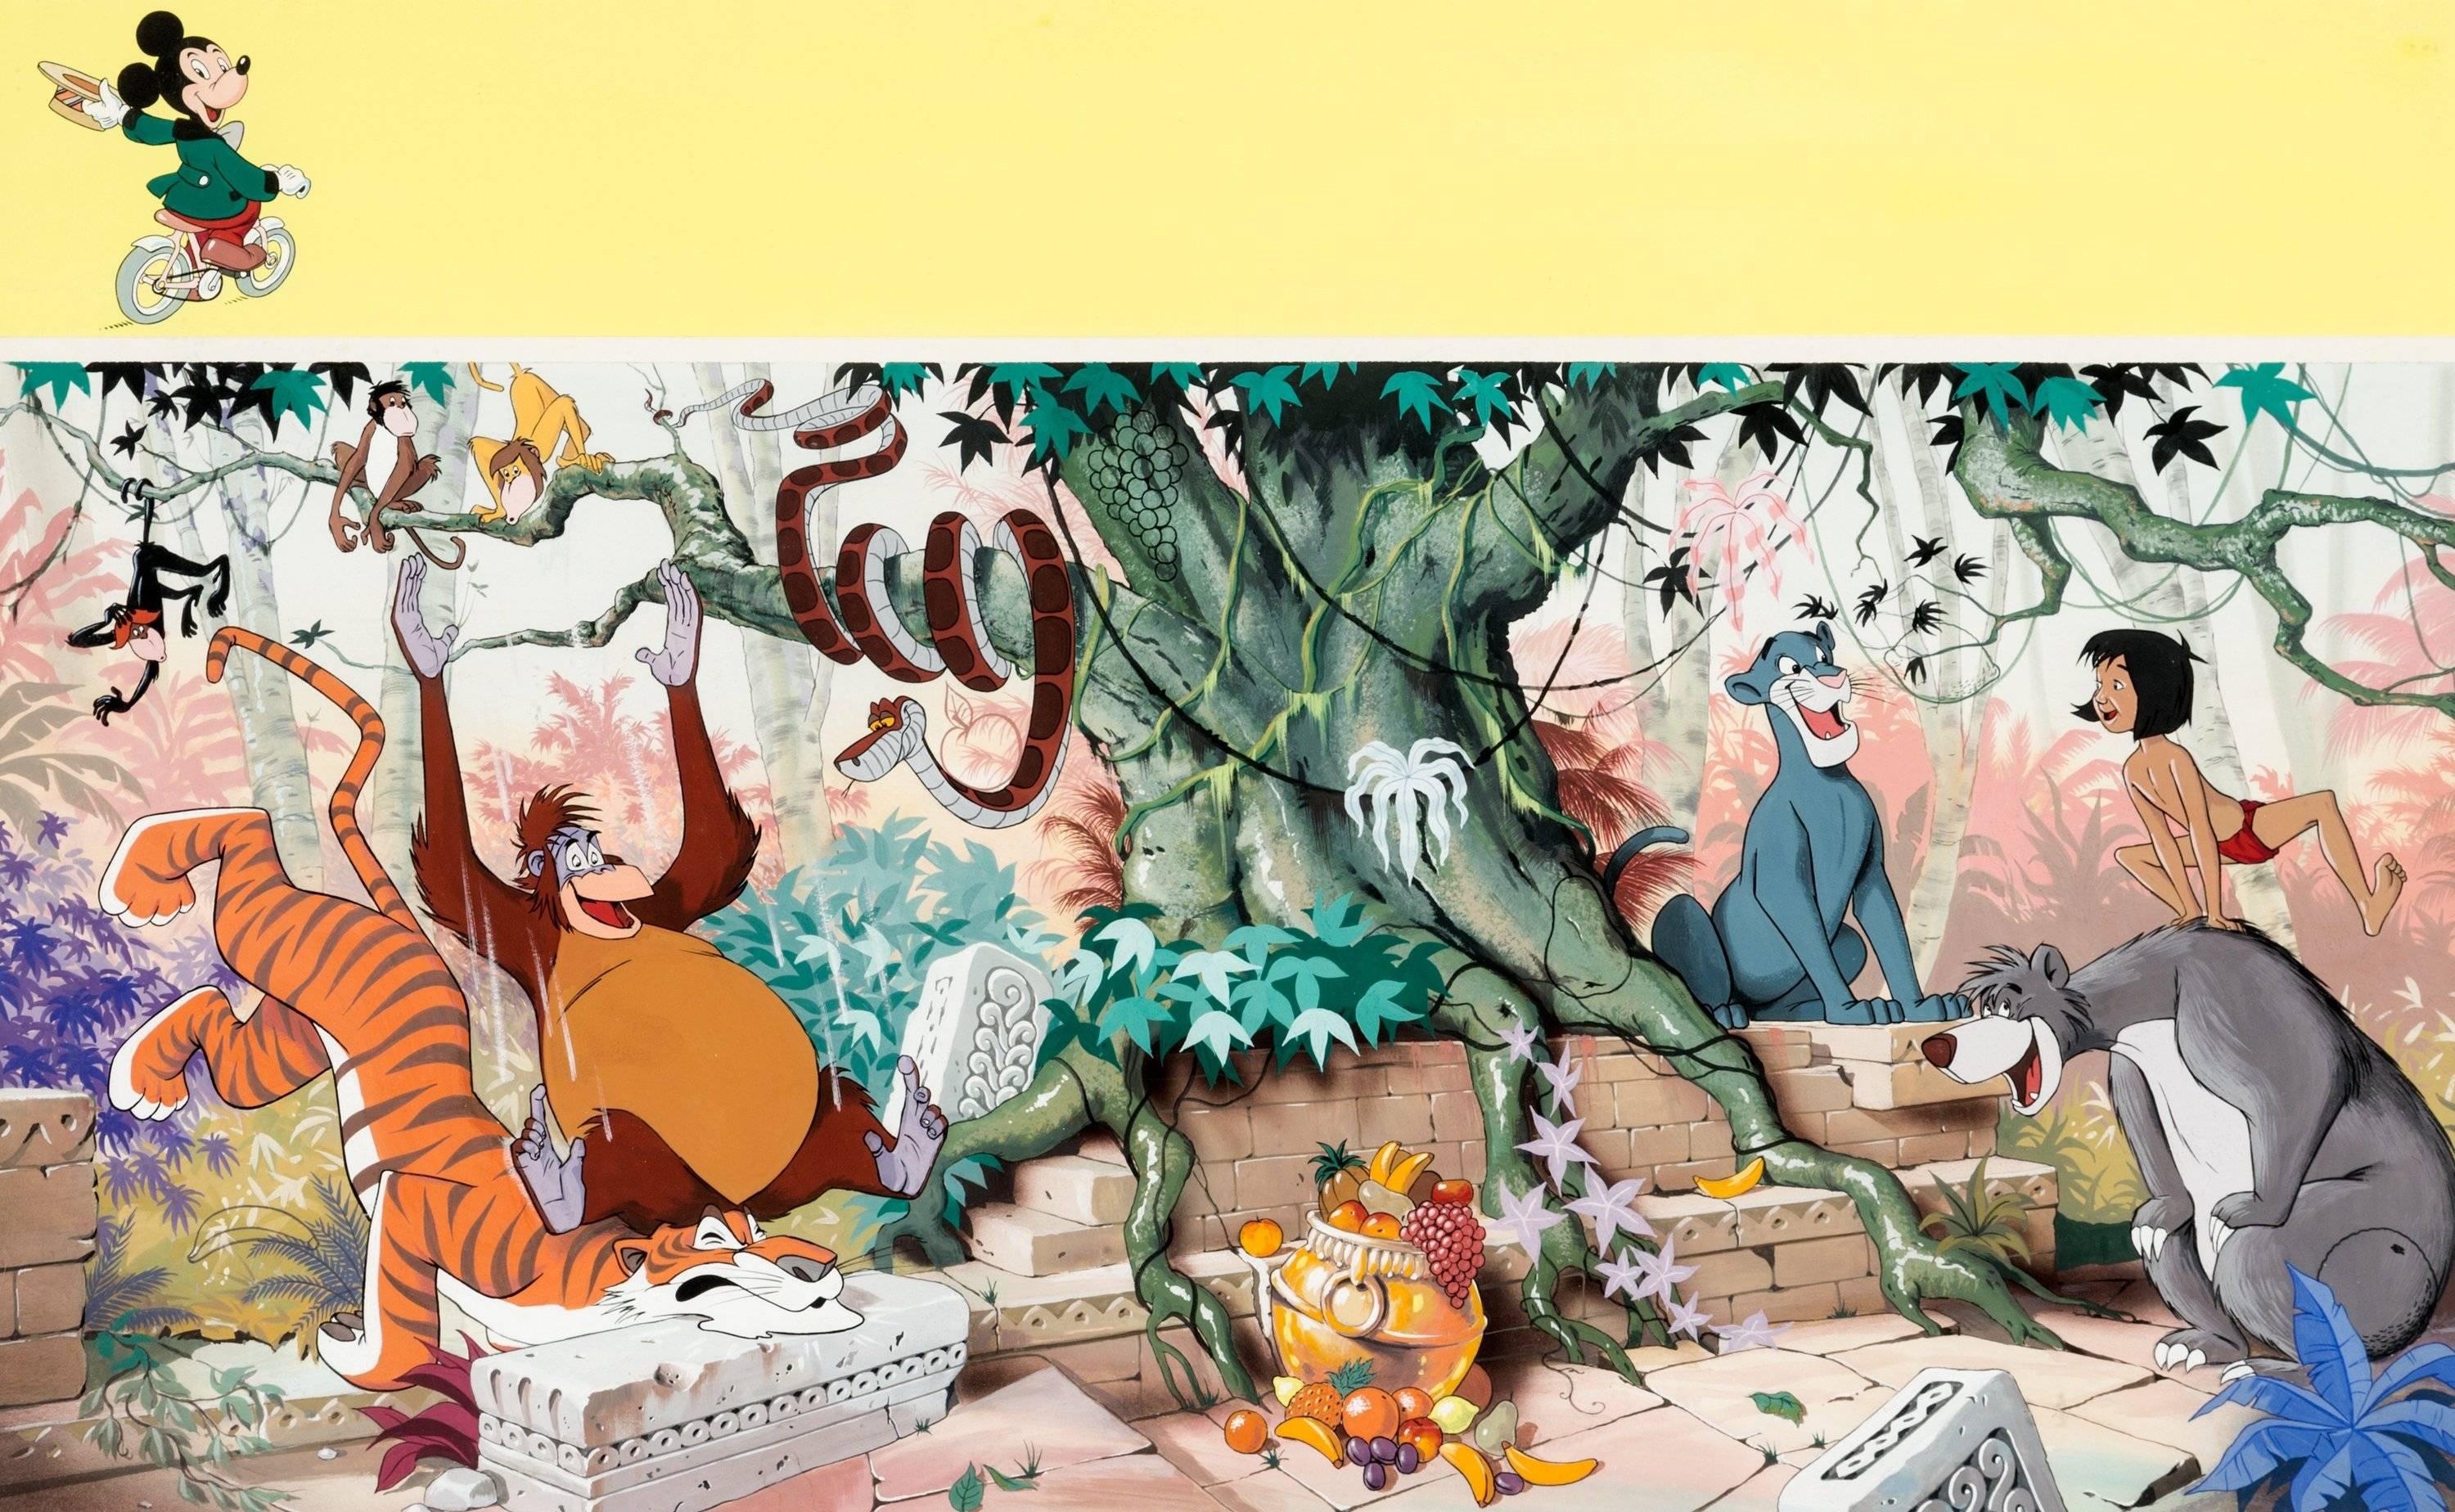 Disneyland Magazine #9 Wrap-Around Cover Painting "Jungle Book"  - Mixed Media Art by Unknown